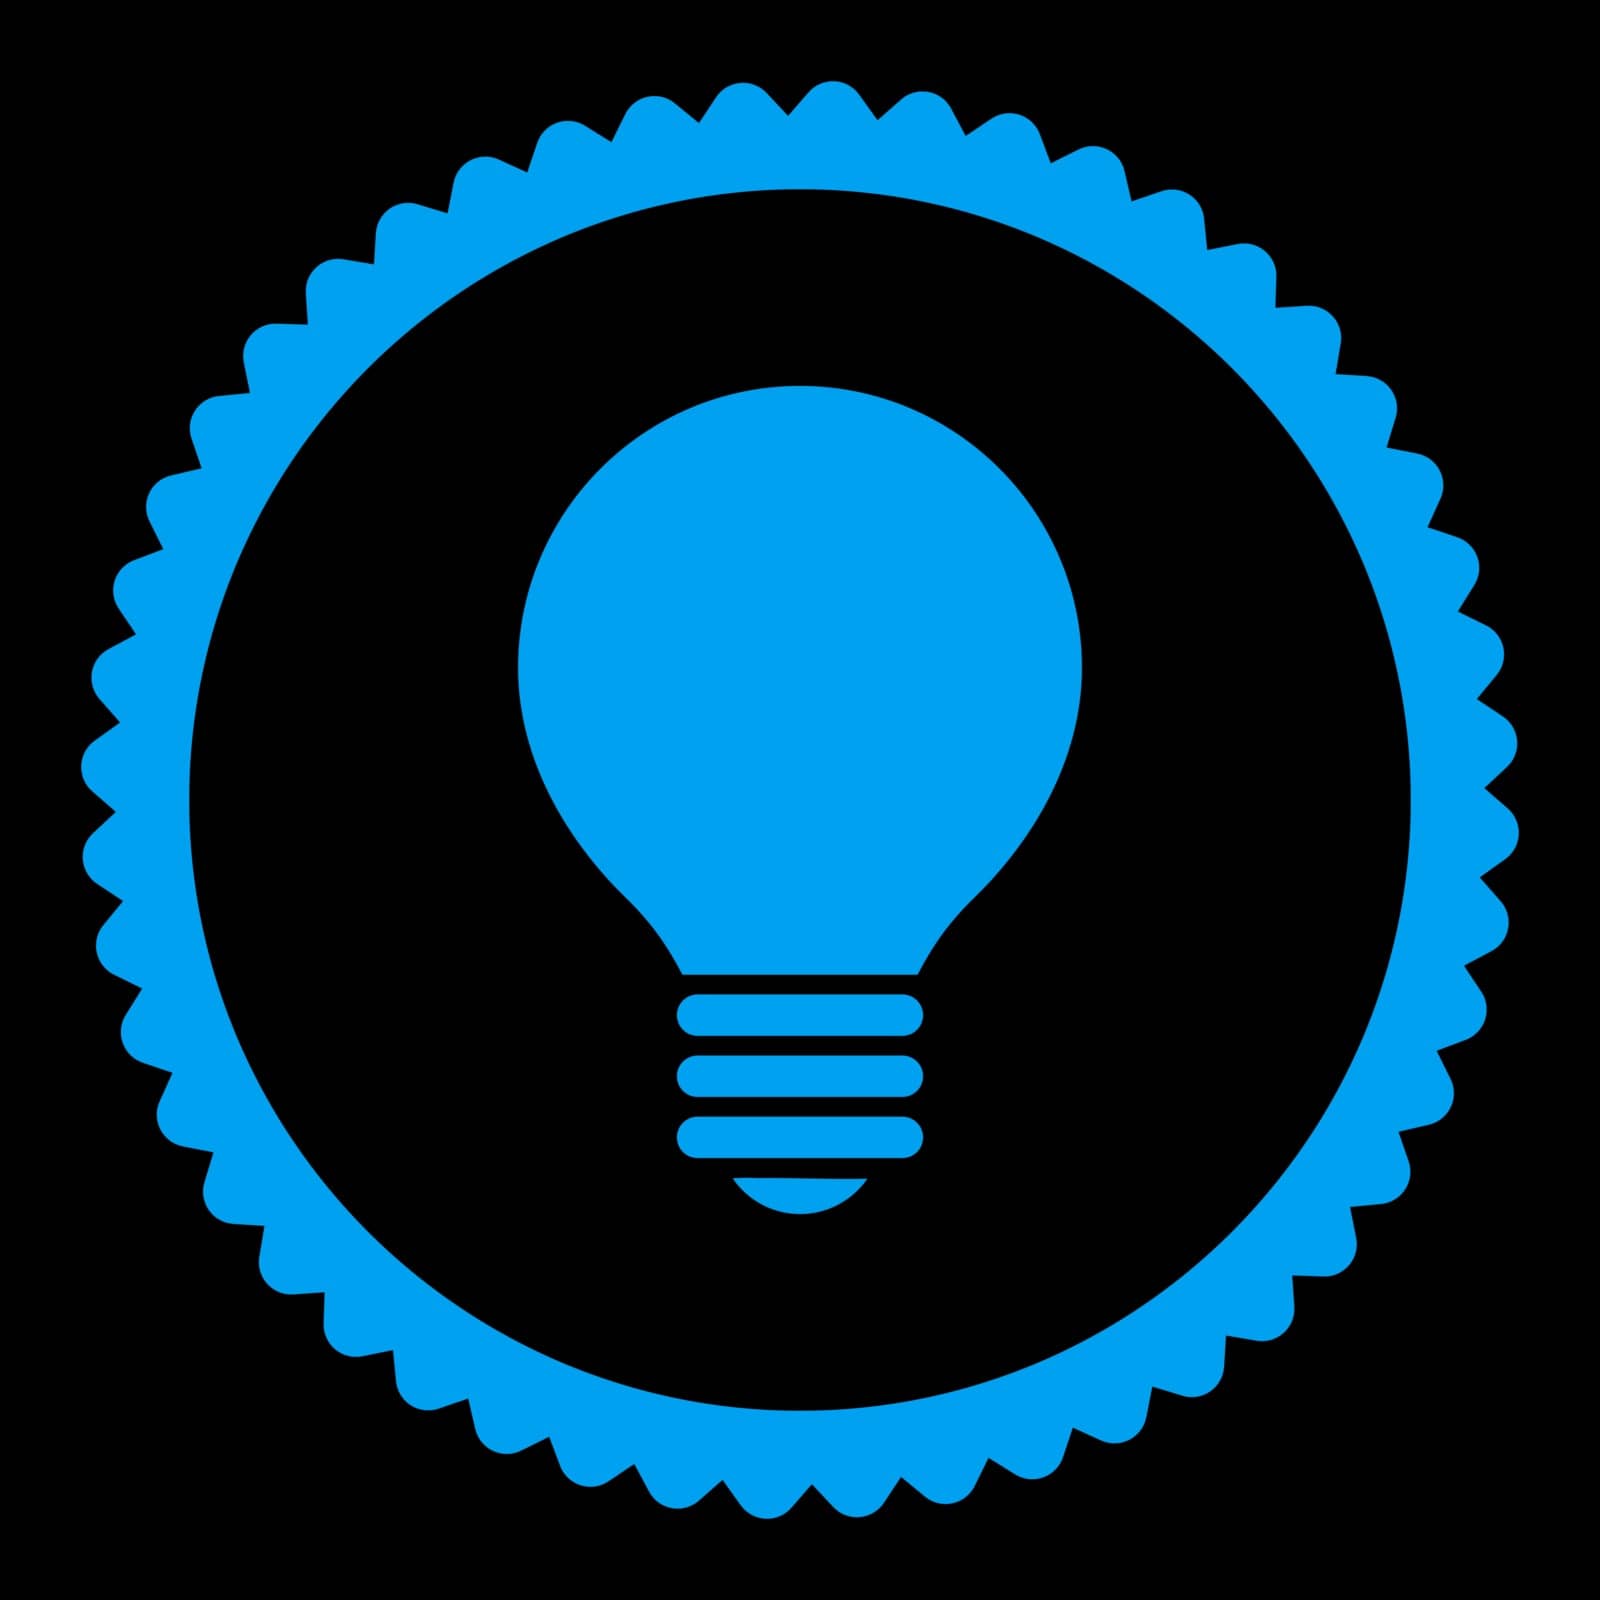 Electric Bulb flat blue color round stamp icon by ahasoft